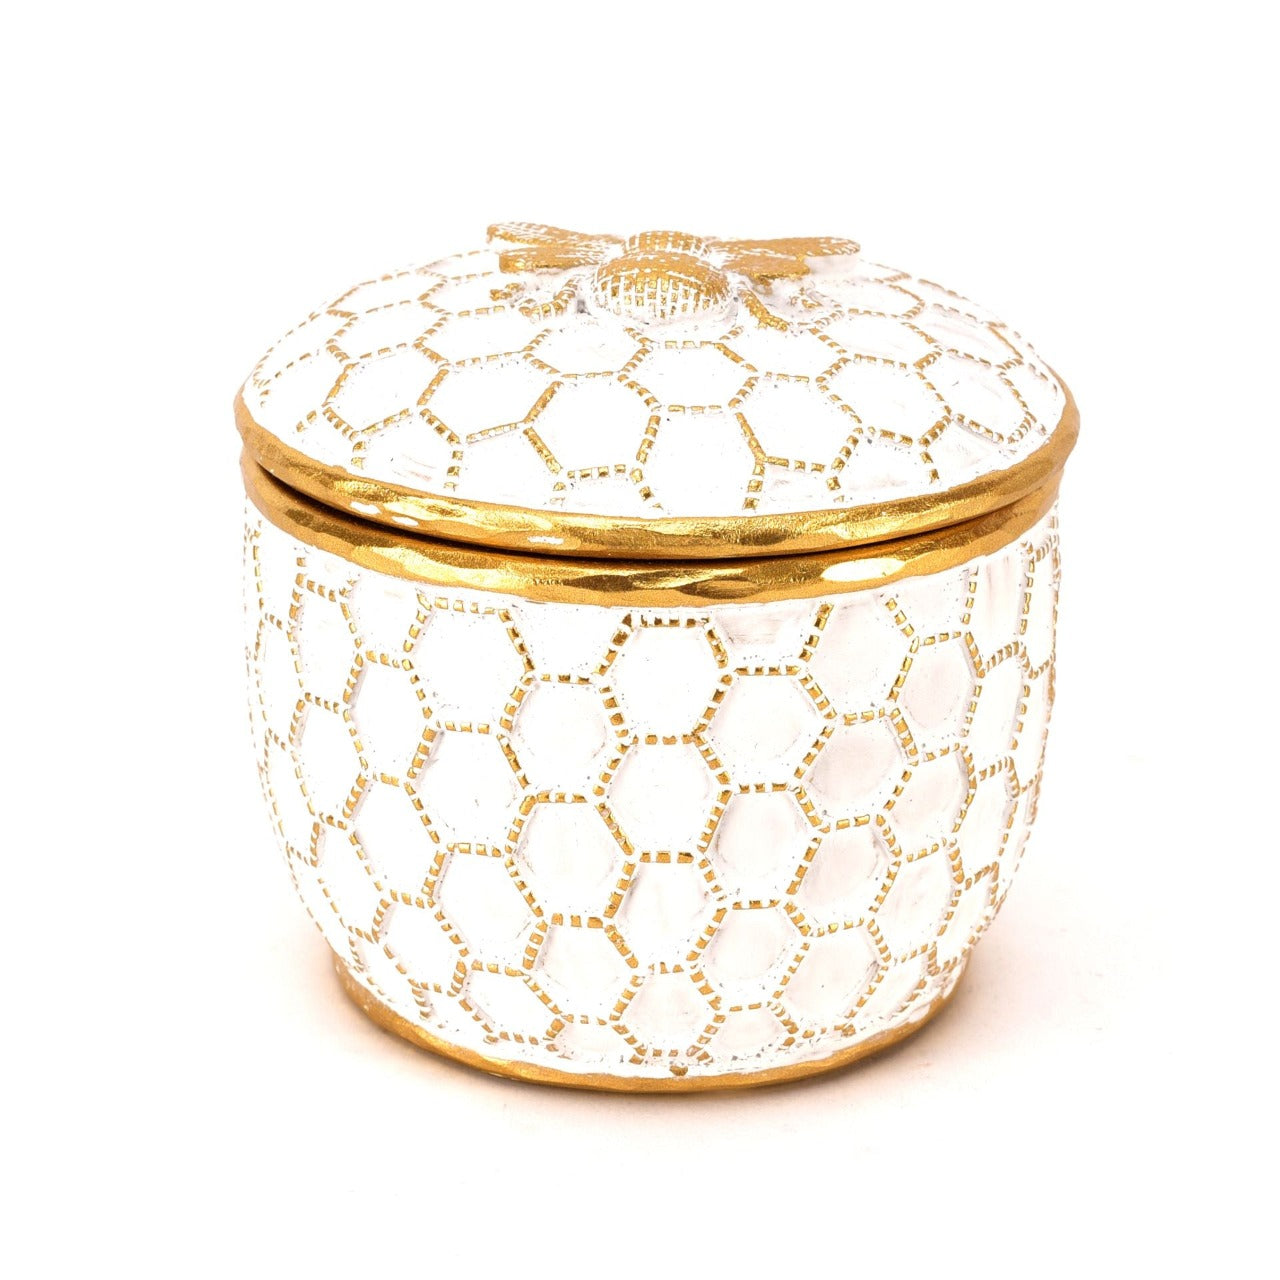 Honey Bee Resin Trinket Box  Bring some glamour to the home with this gorgeous golden bee trinket box. From the Wildflower collection by HESTIA® - homeware inspired by the Great British outdoors.